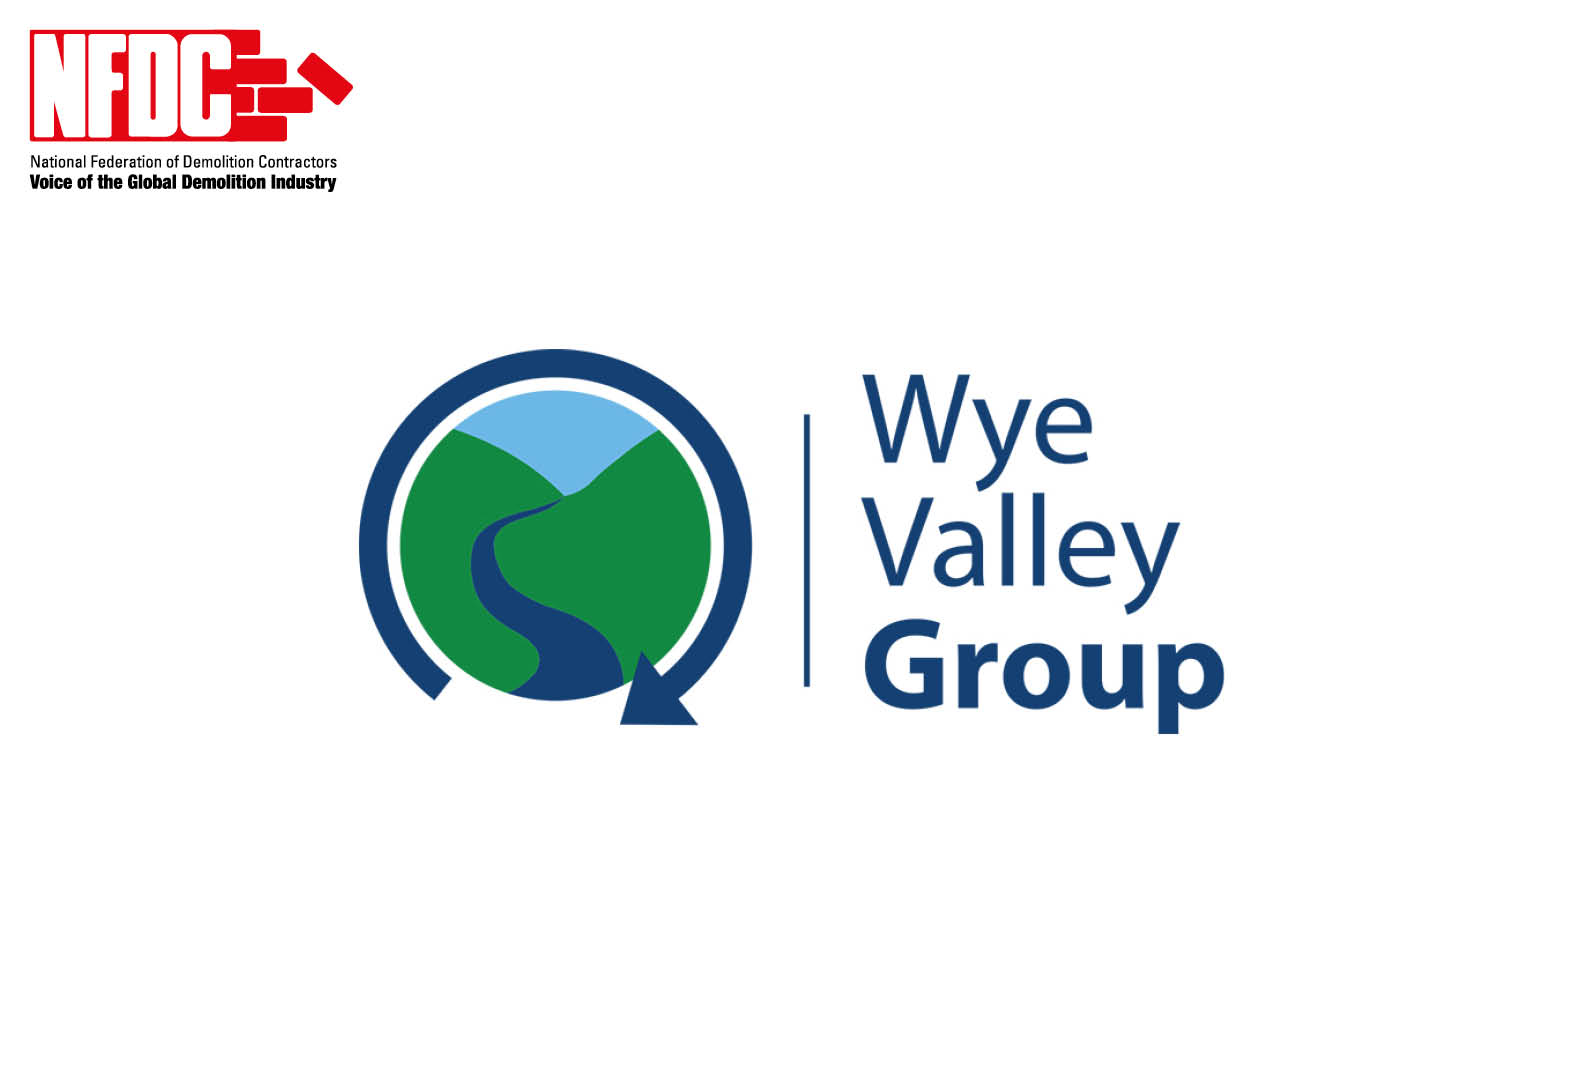 Wye Valley Group